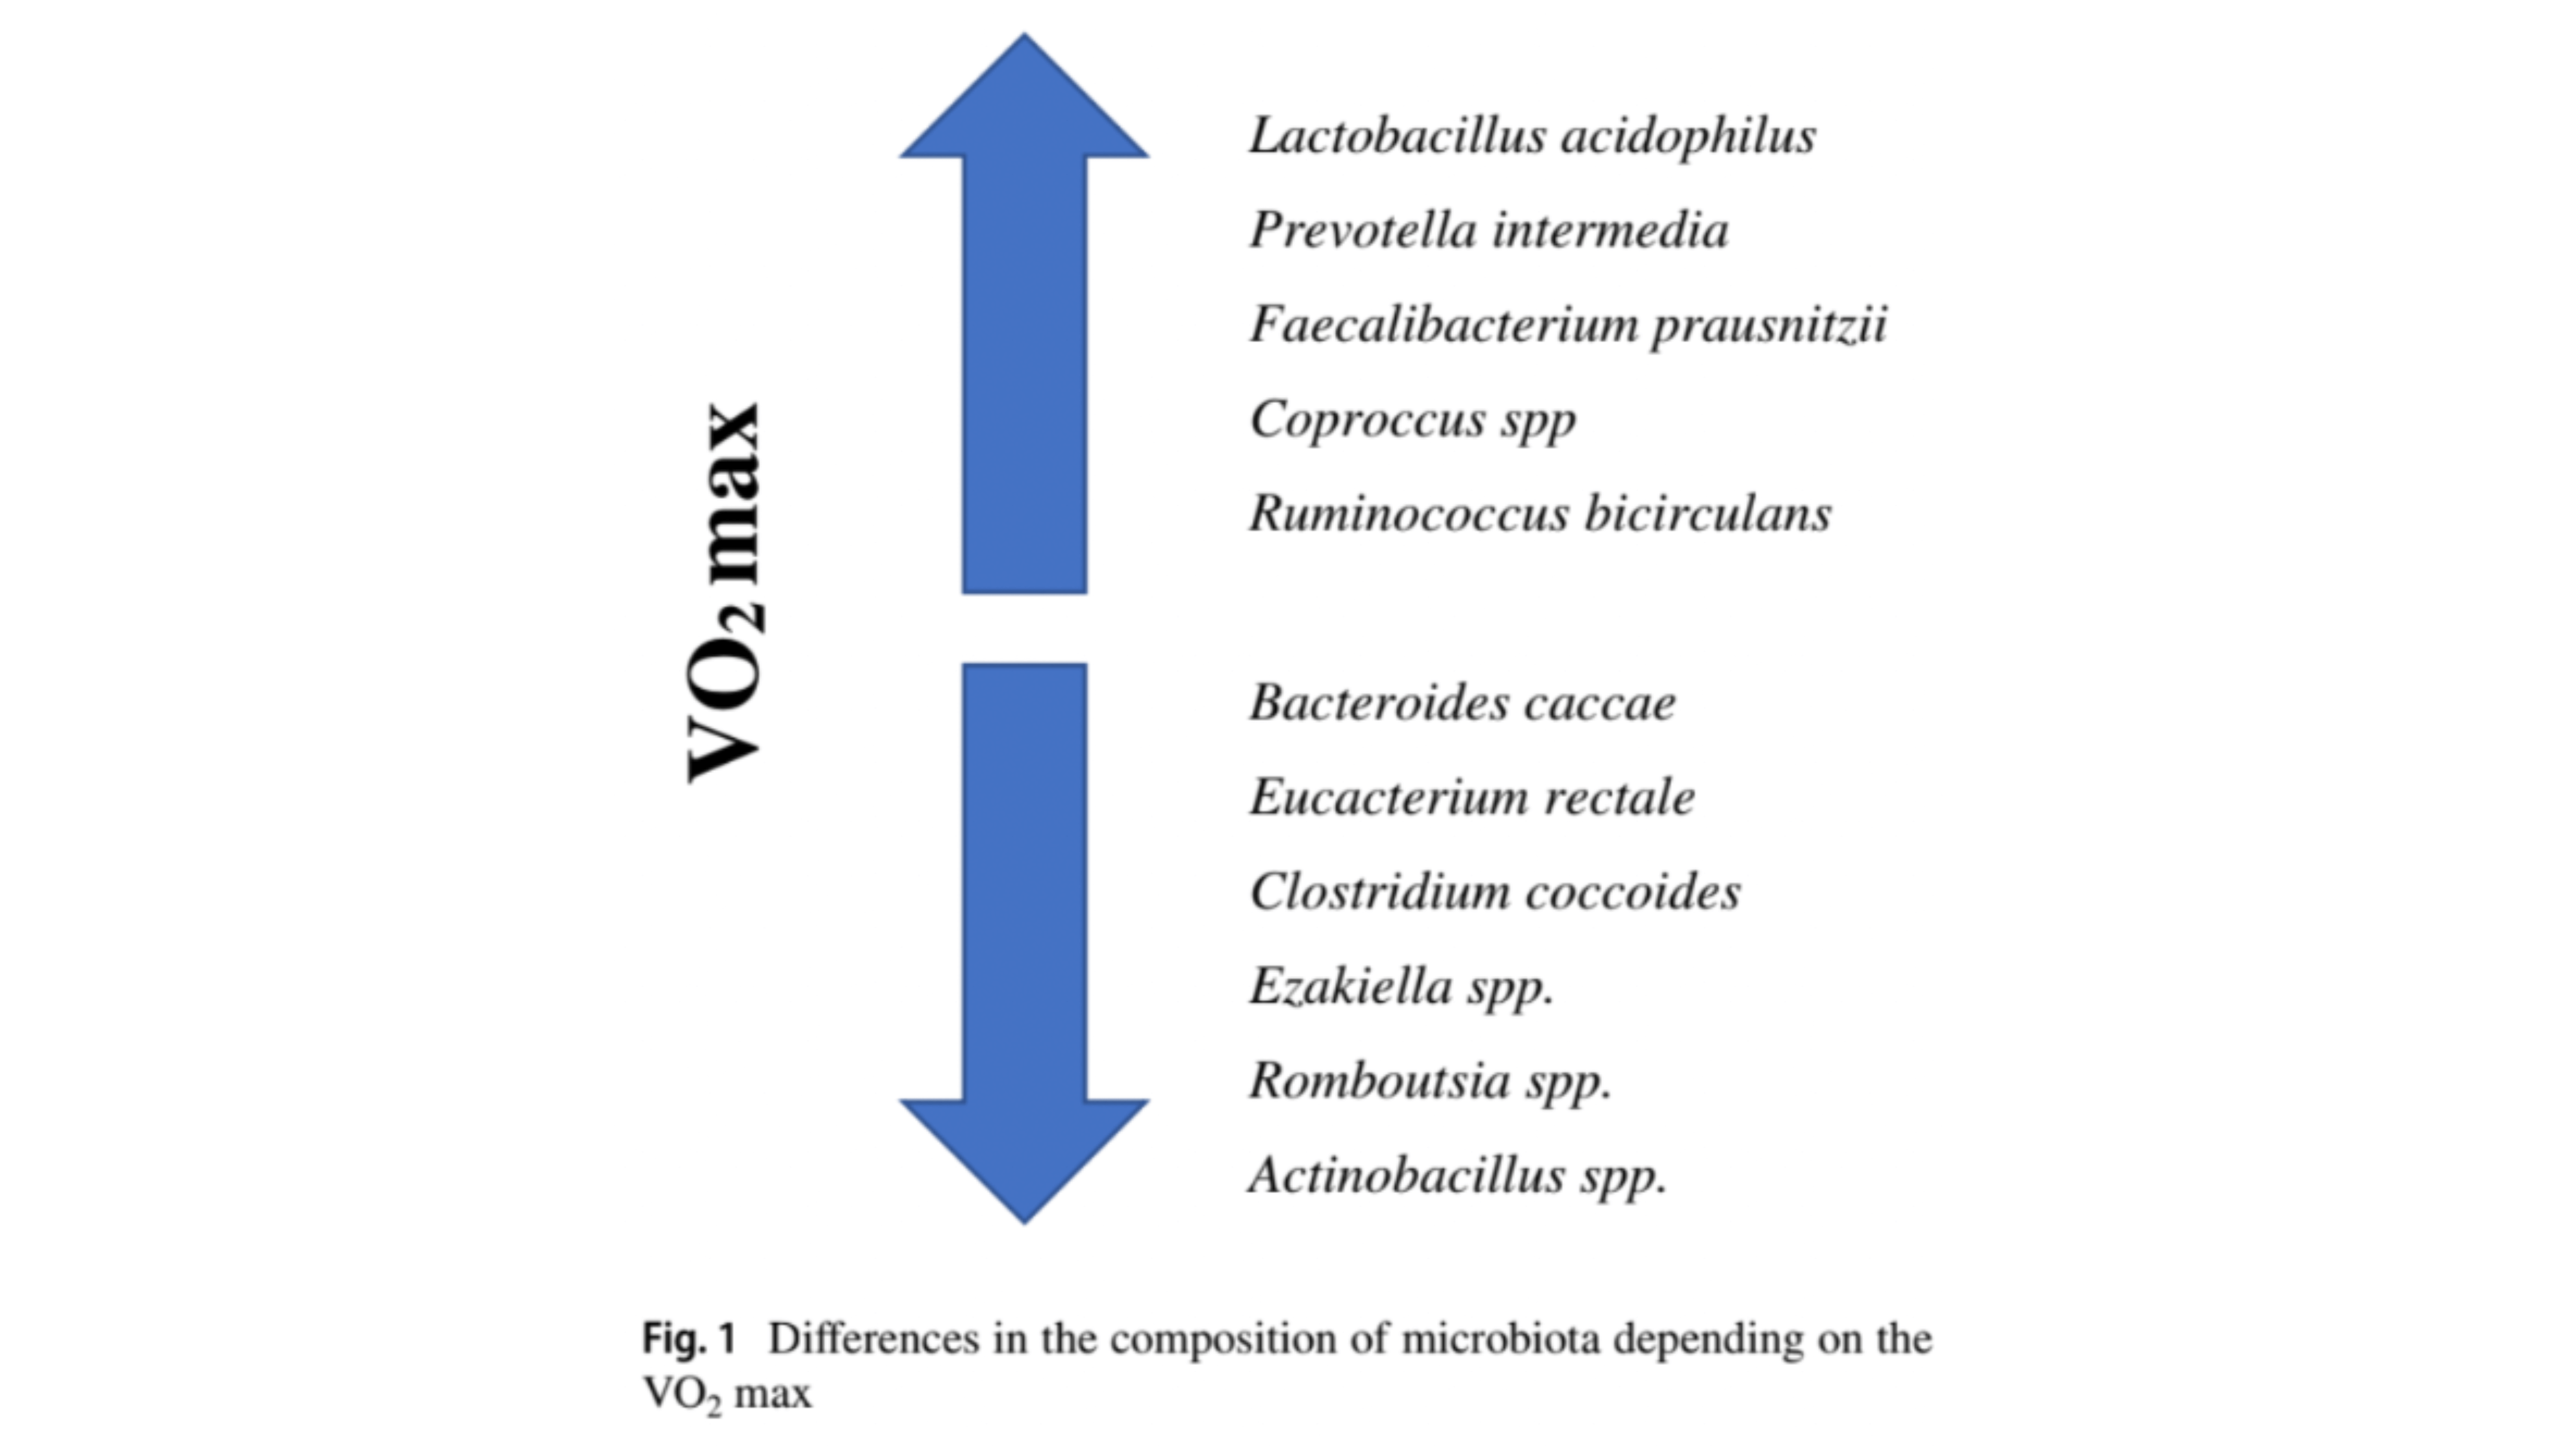 A diagram of V02 max and the differences in the composition of microbiota depending on the VO2 max